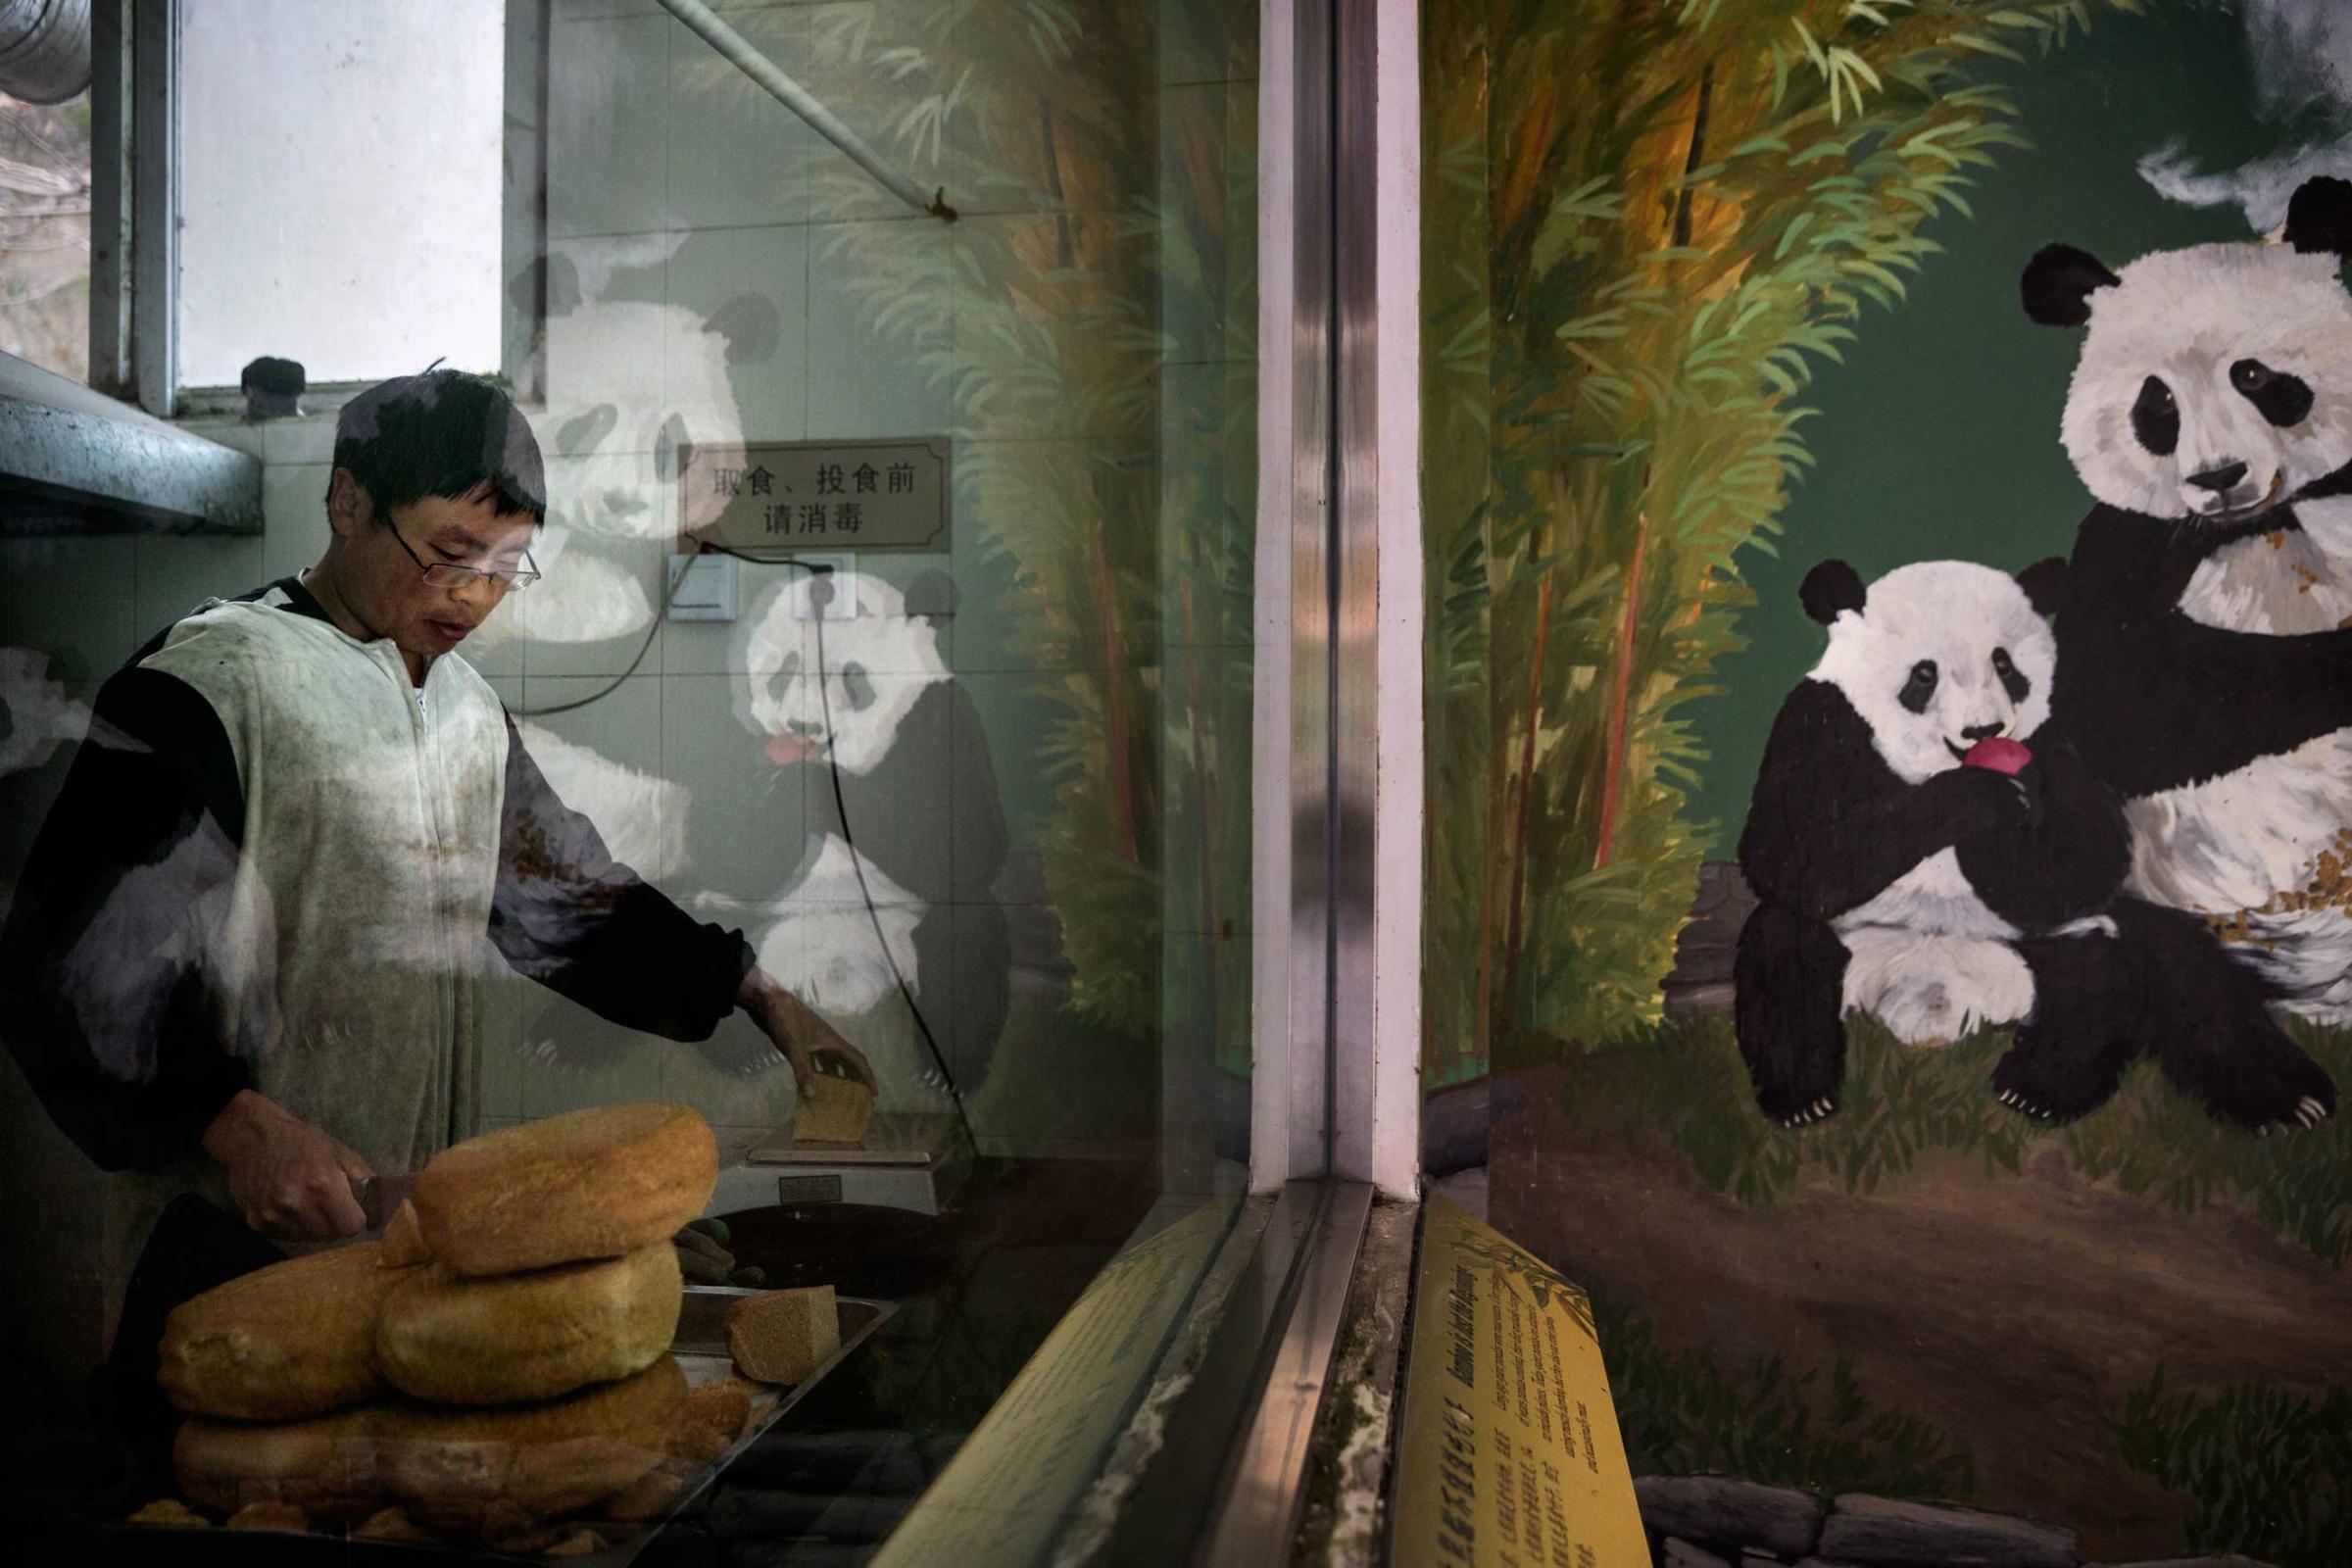 A panda mural is reflected in the window where specially made bread for the pandas is prepared, Dec. 2, 2015.